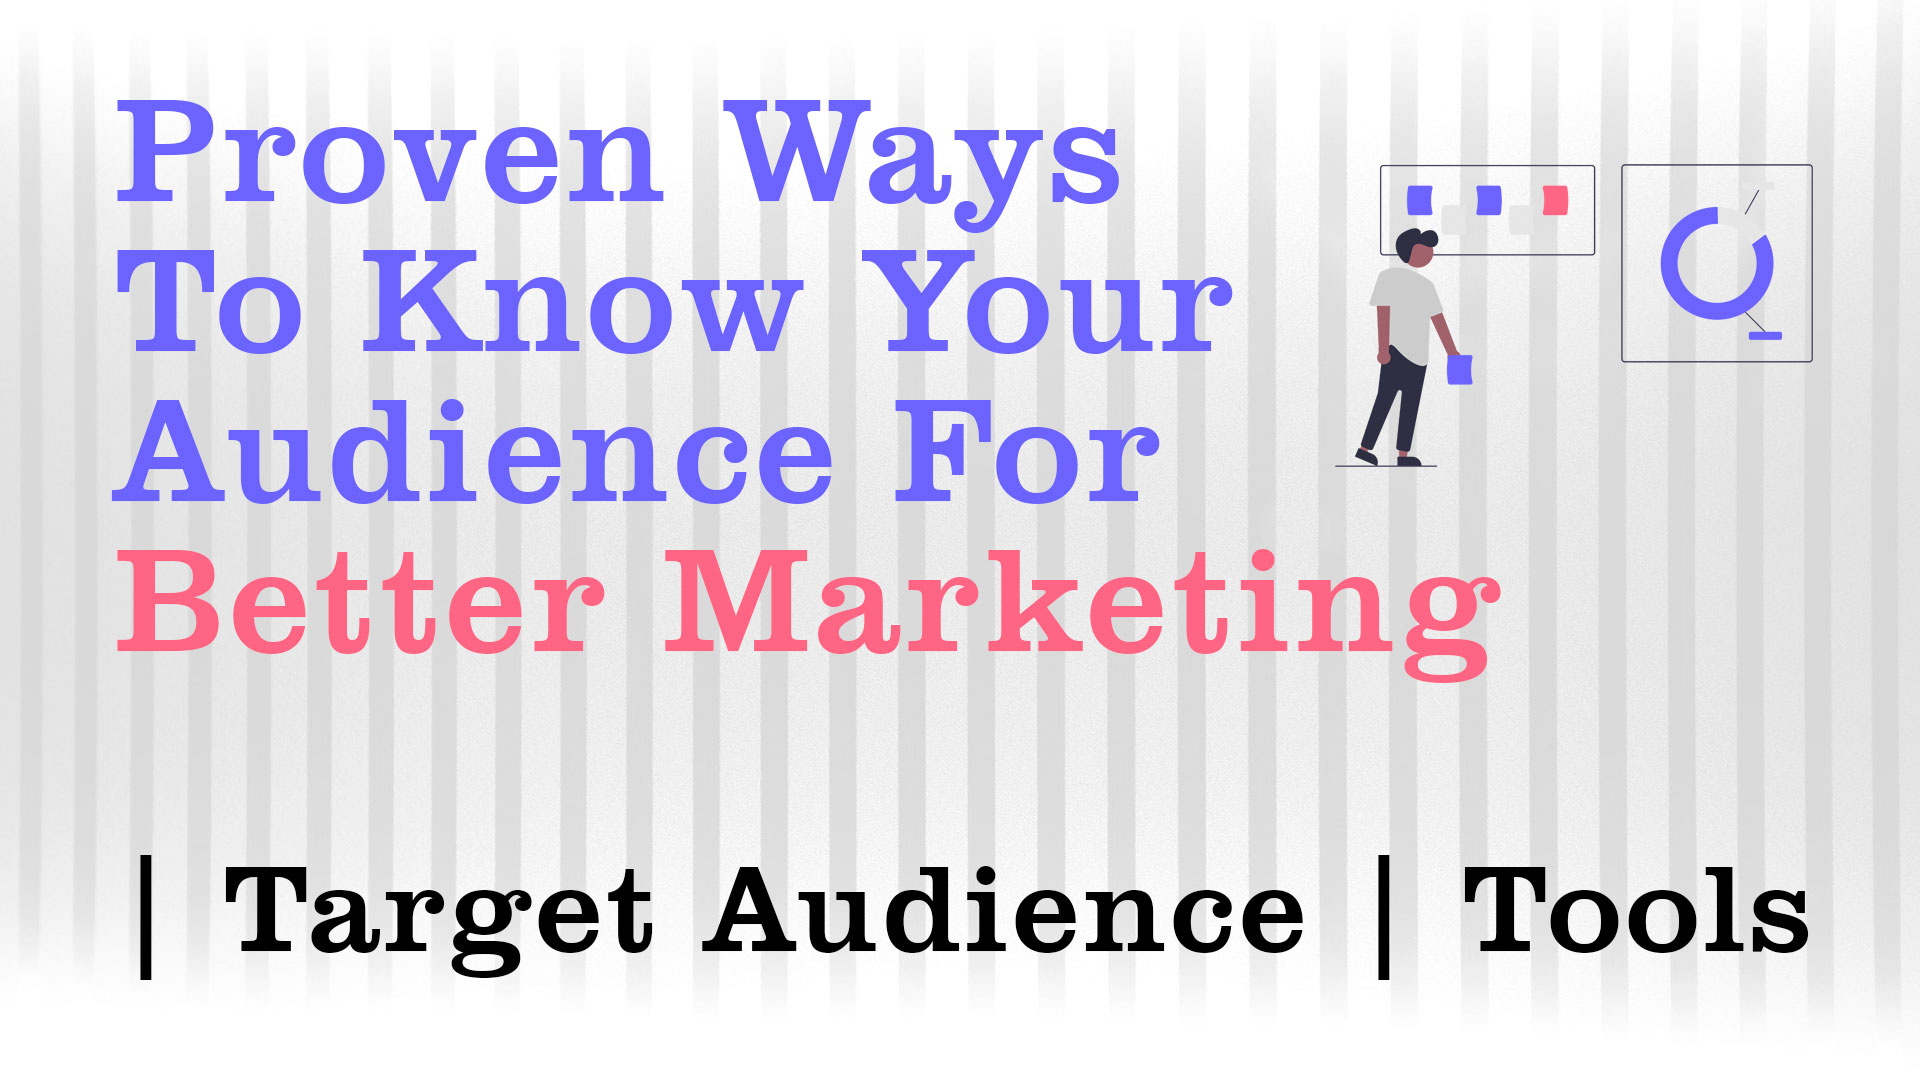 6 Proven Ways To Know Your Audience For Better Marketing Tools List